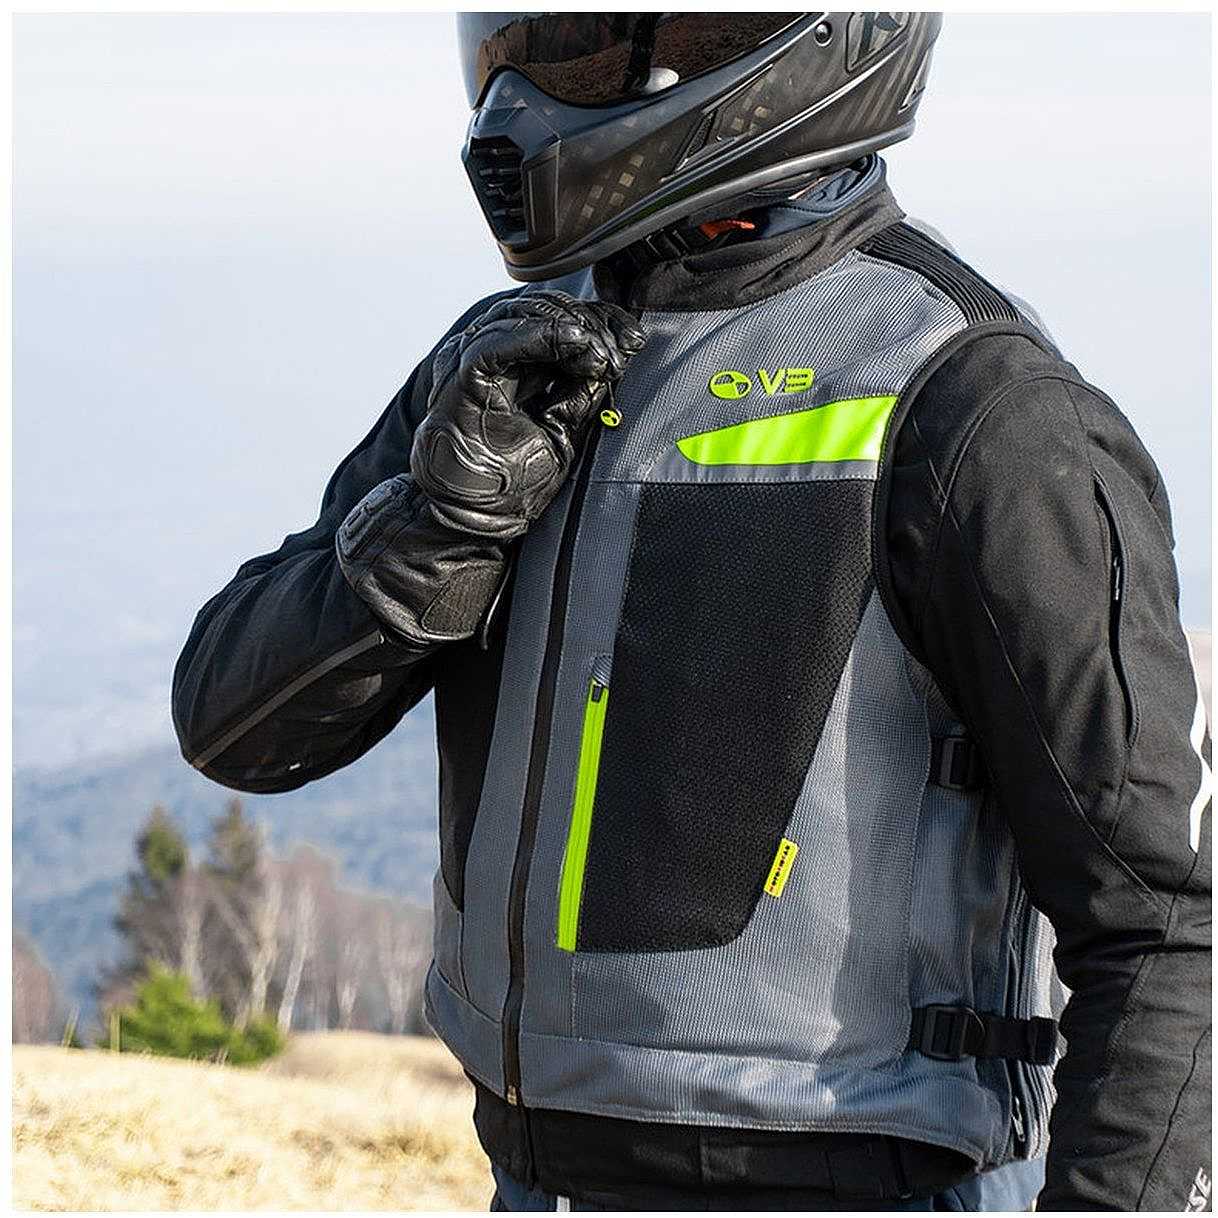 Motoairbag vest Mab V3 Fast Loock Front and Rear Airbag Gray Yellow For  Sale Online 